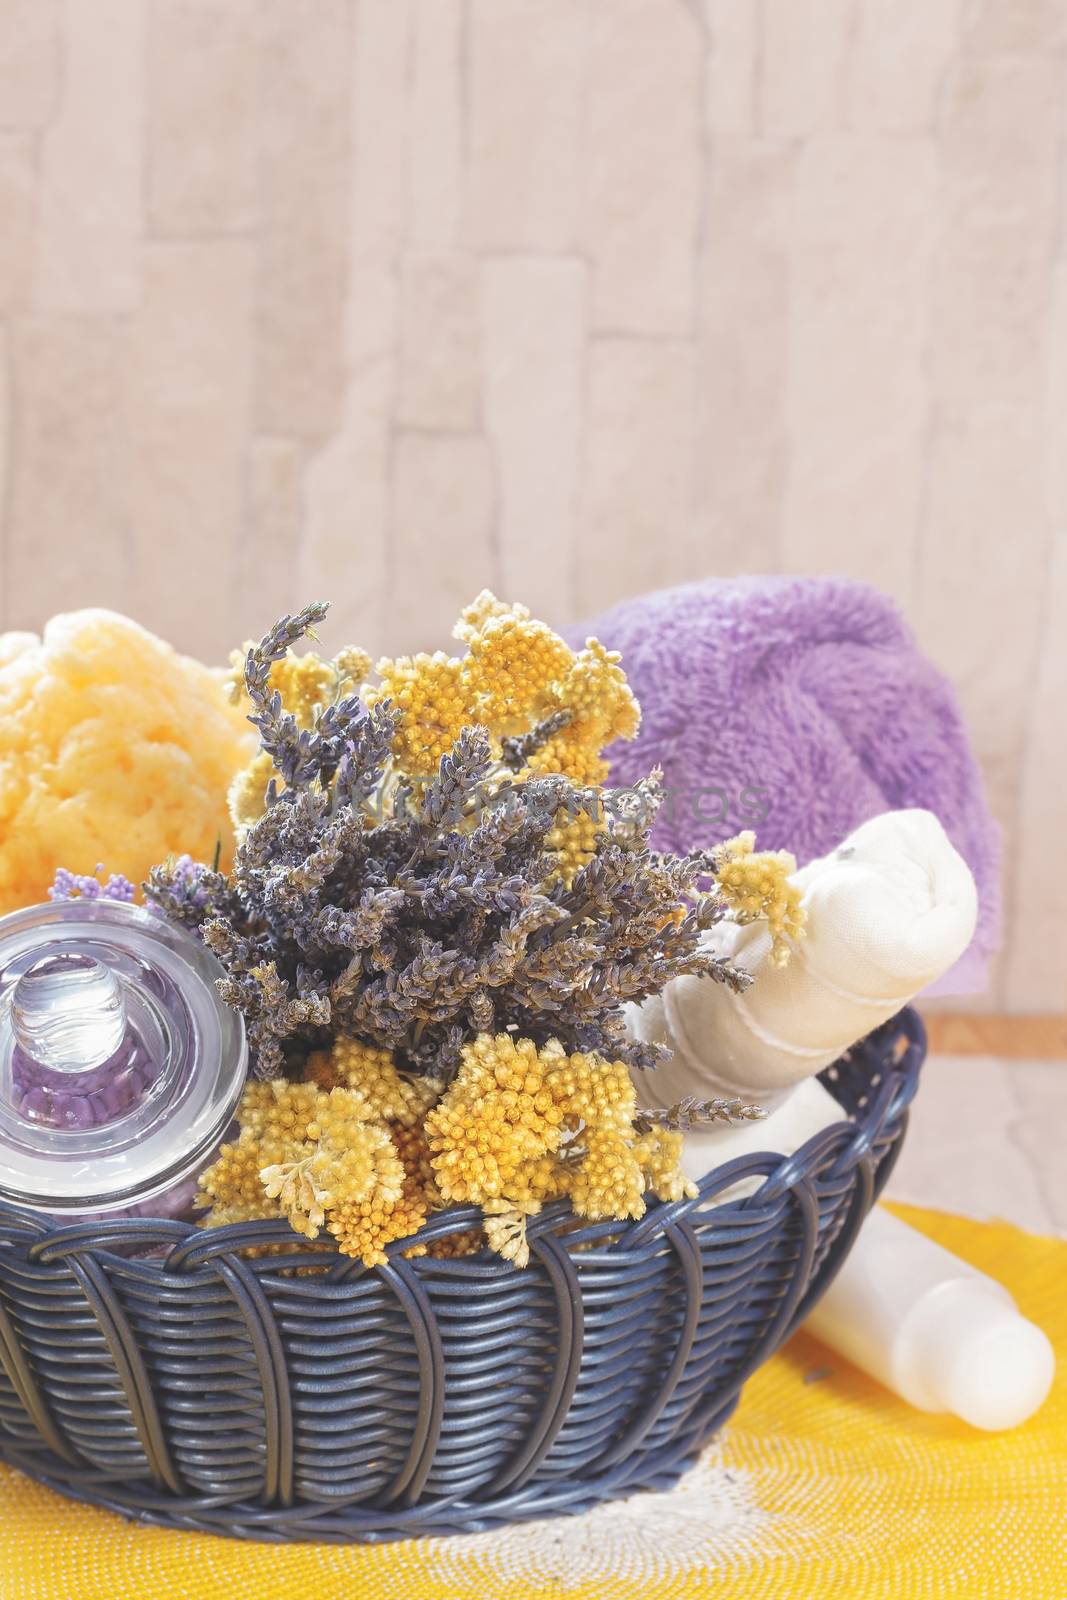 Natural spa treatment with lavender and helichrysum (immortelle). by Slast20